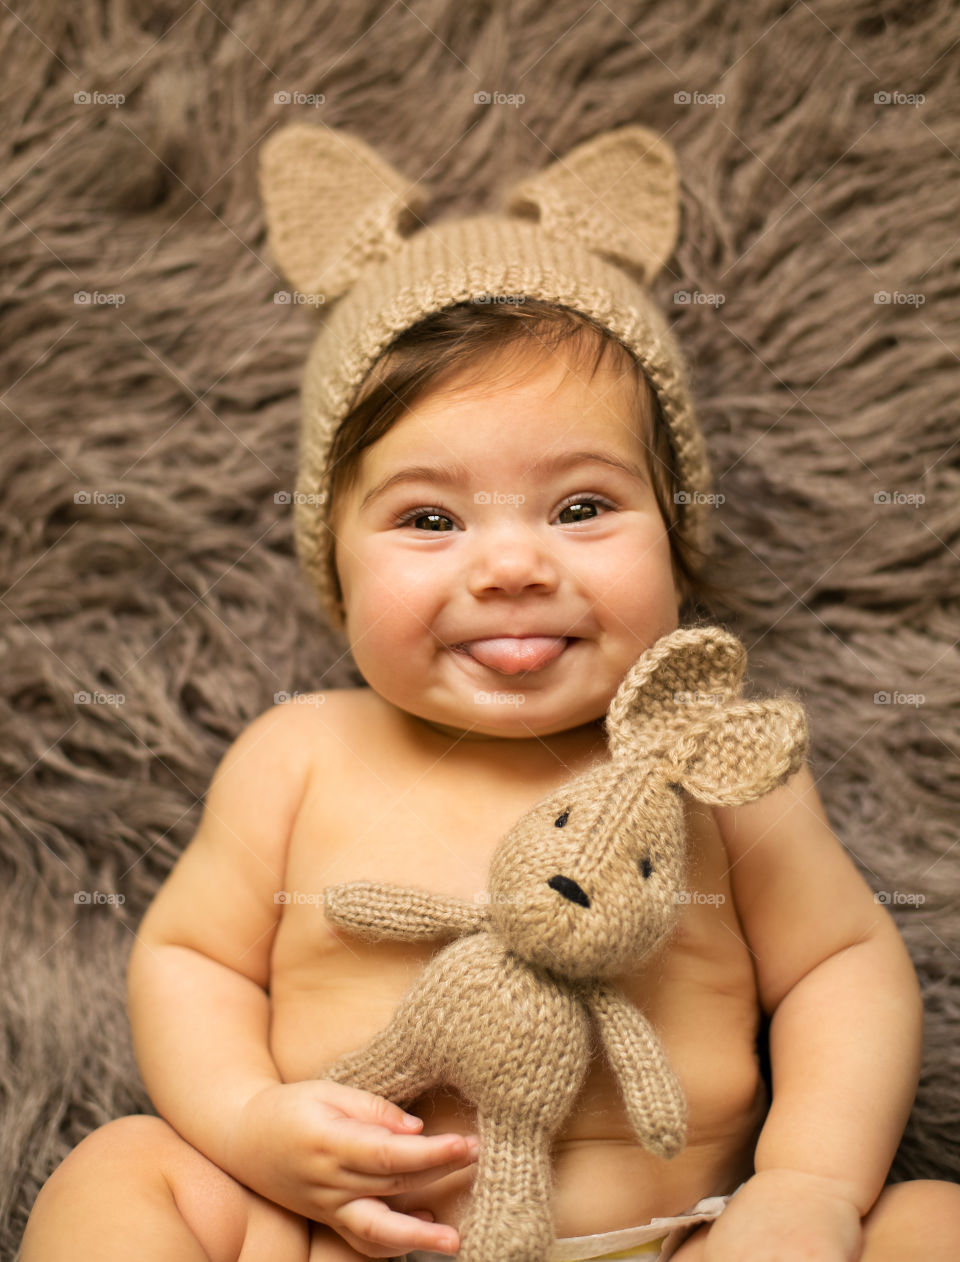 A baby holding woolen toy